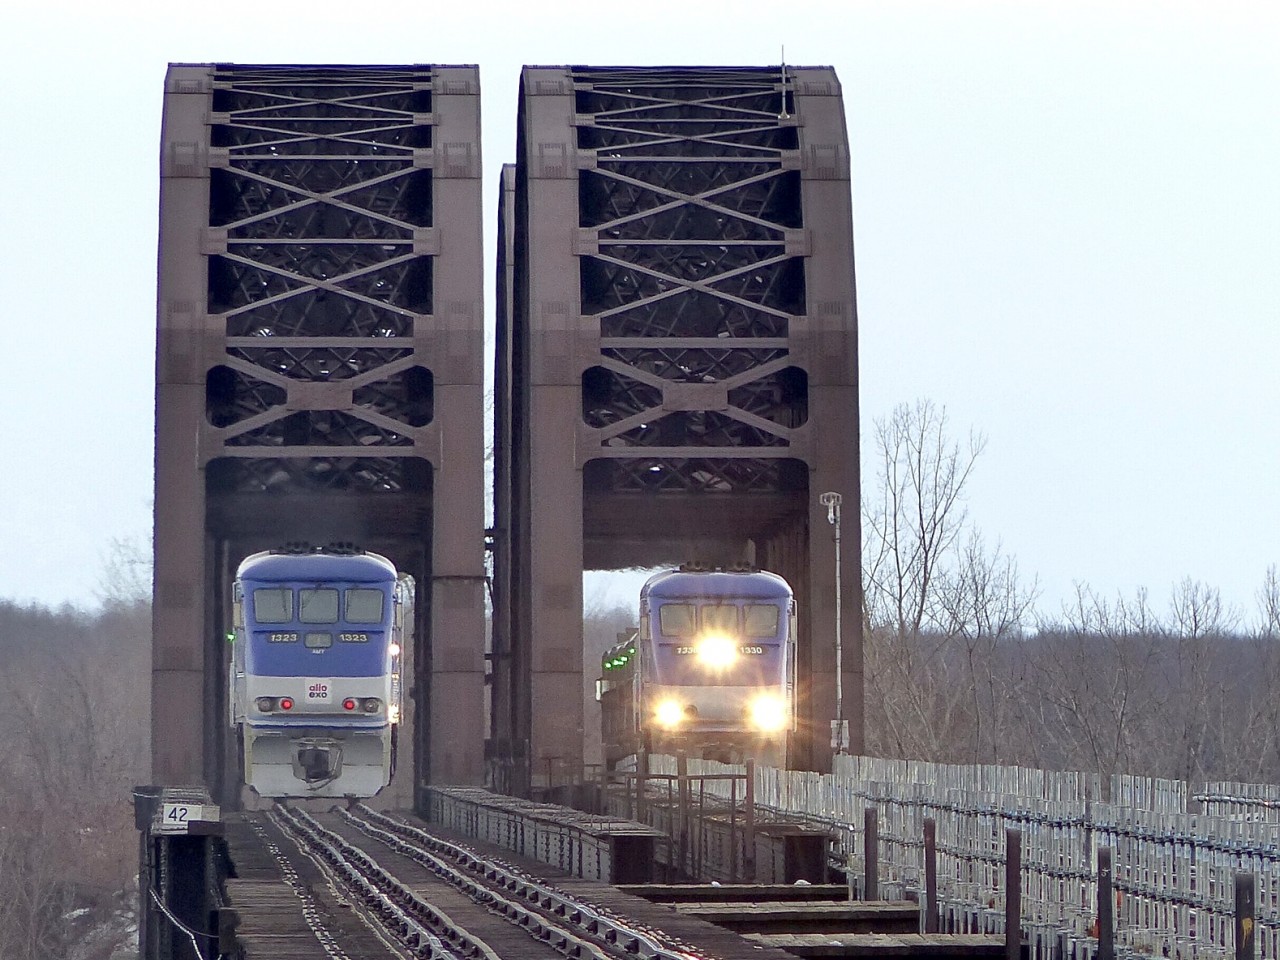 EXO train number 81 returns from its trio to Candiac while EXO 85 is heading there. The EMD F59PHI is the engine used for this line as both trains have them pushing/pulling. We see them crossing the CP LaSalle Bridge over the Saint-Lawrence river.